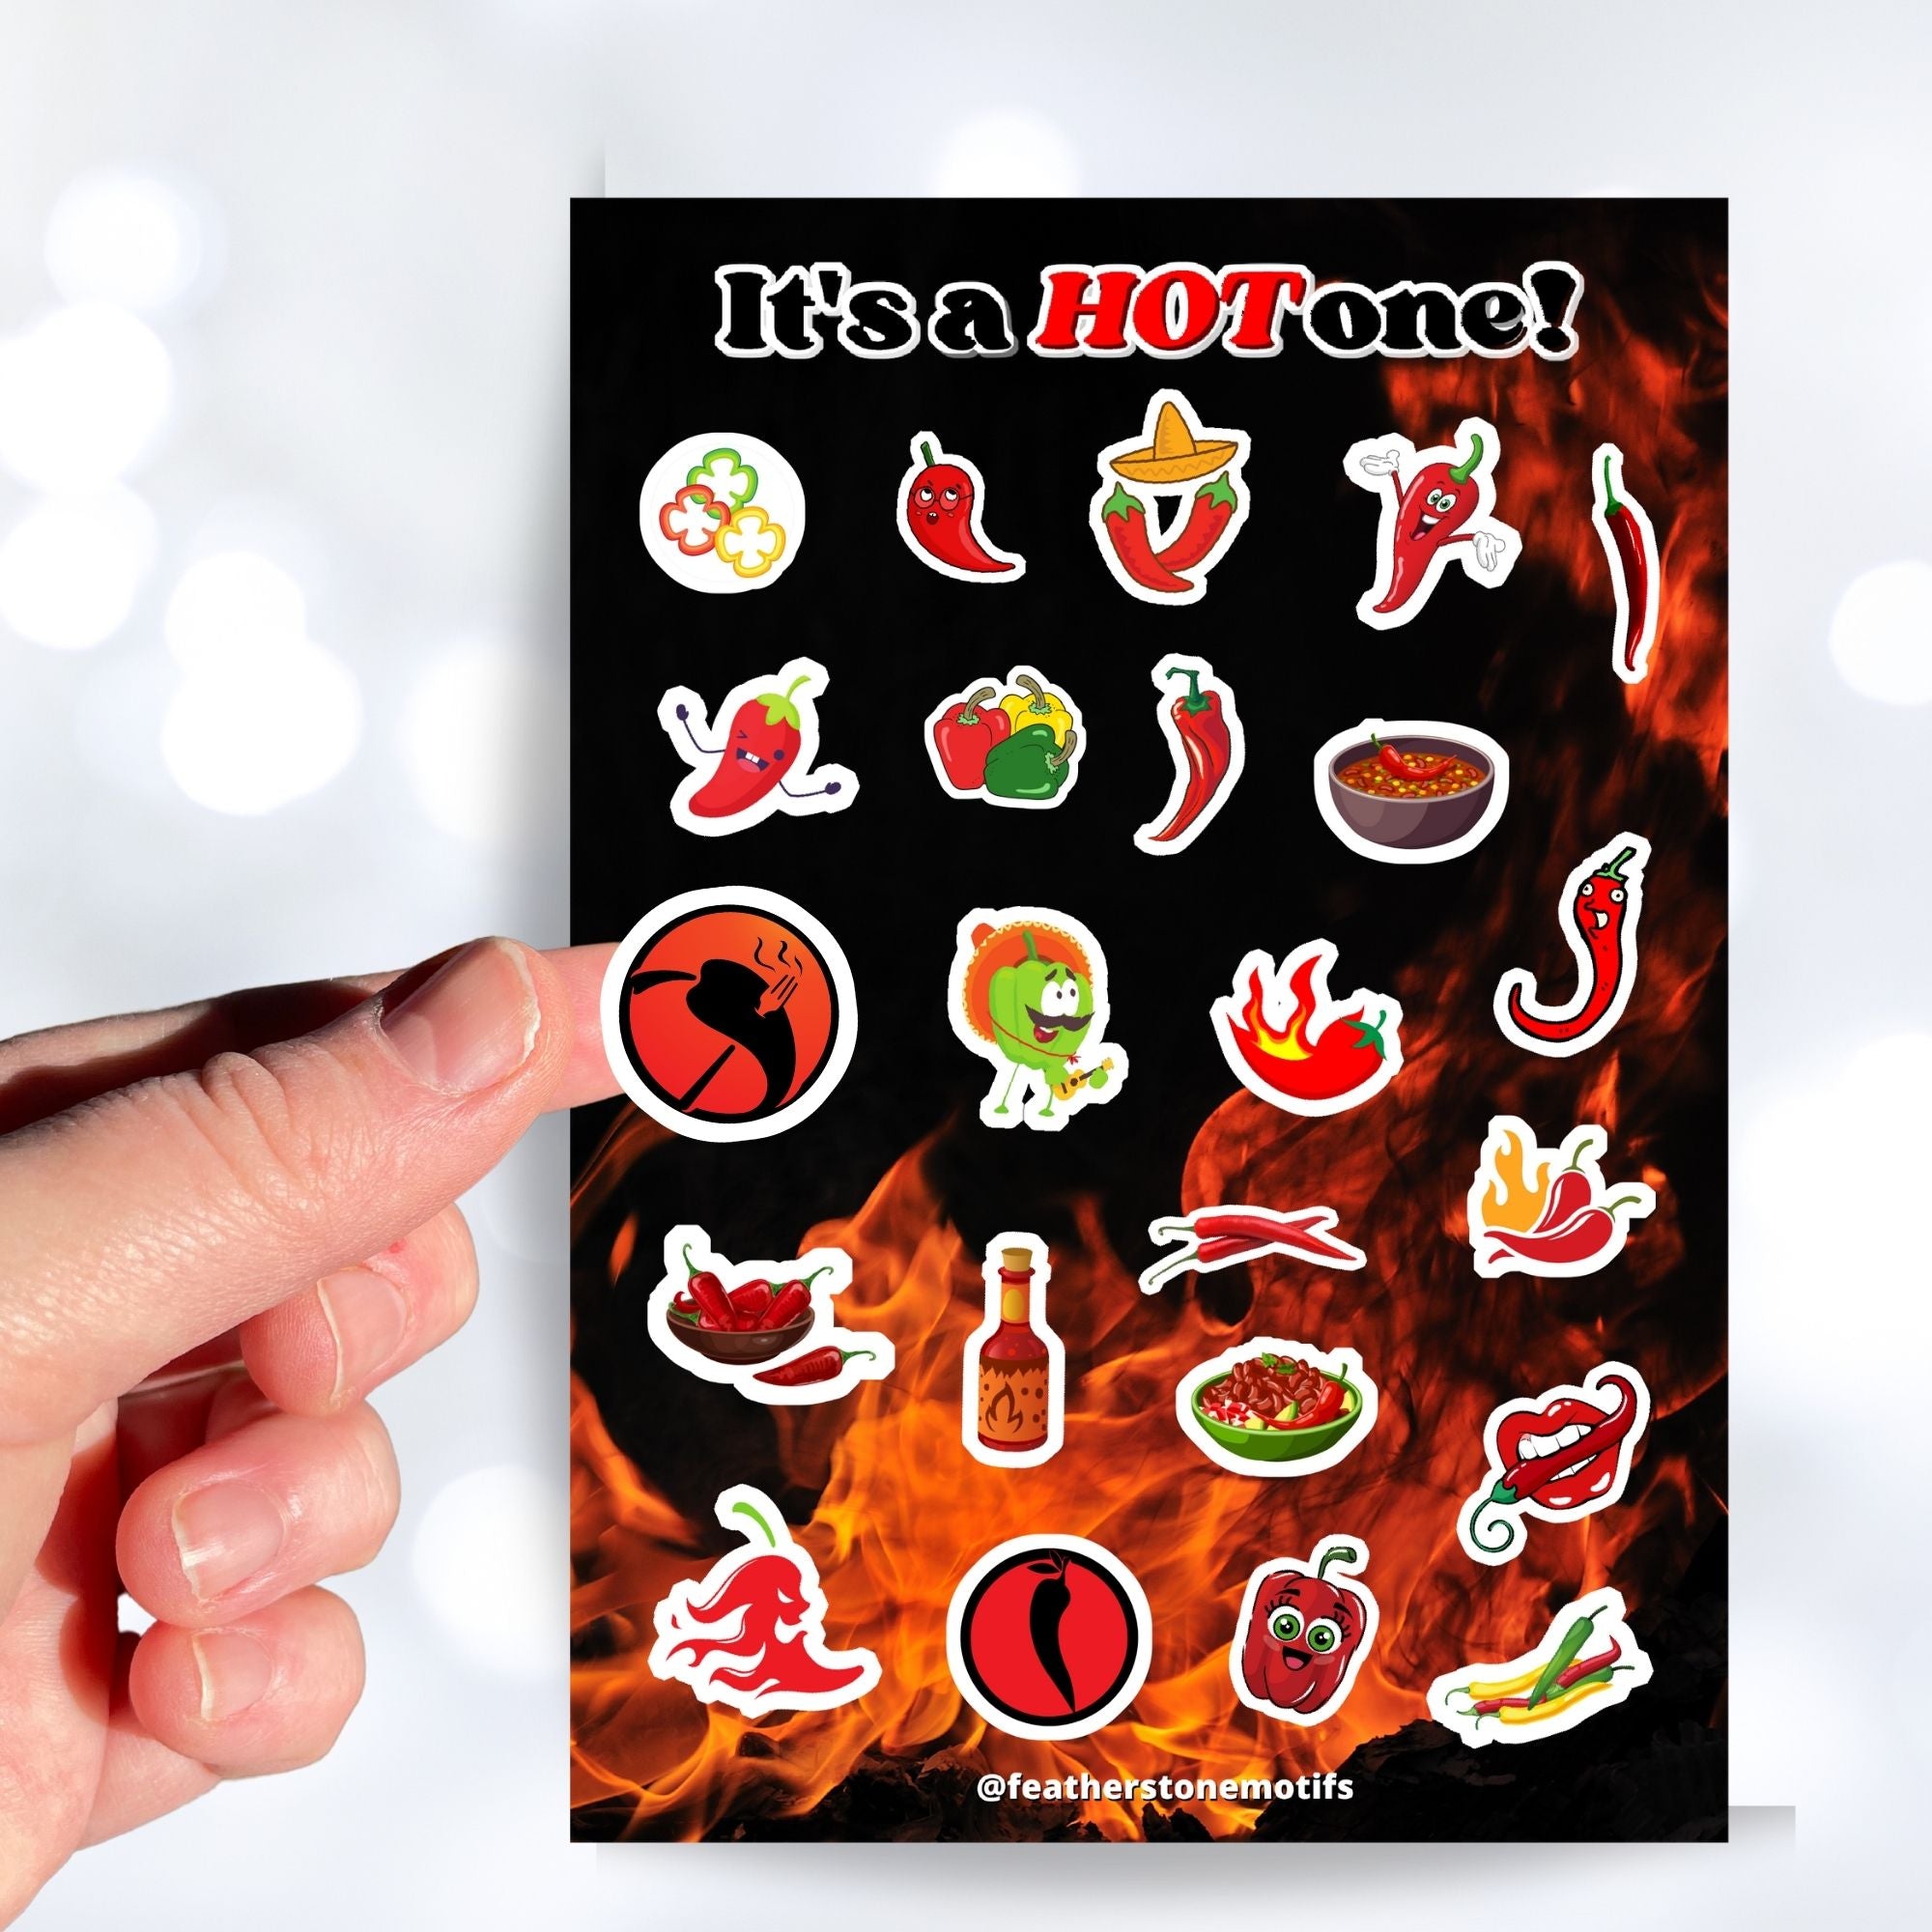 Hot peppers, hot salsa, and hot sauce; this sticker sheet is filled with stickers to celebrate everything spicy! This image shows a hand holding a sticker of a pepper on a fork with a red background above the sticker sheet.